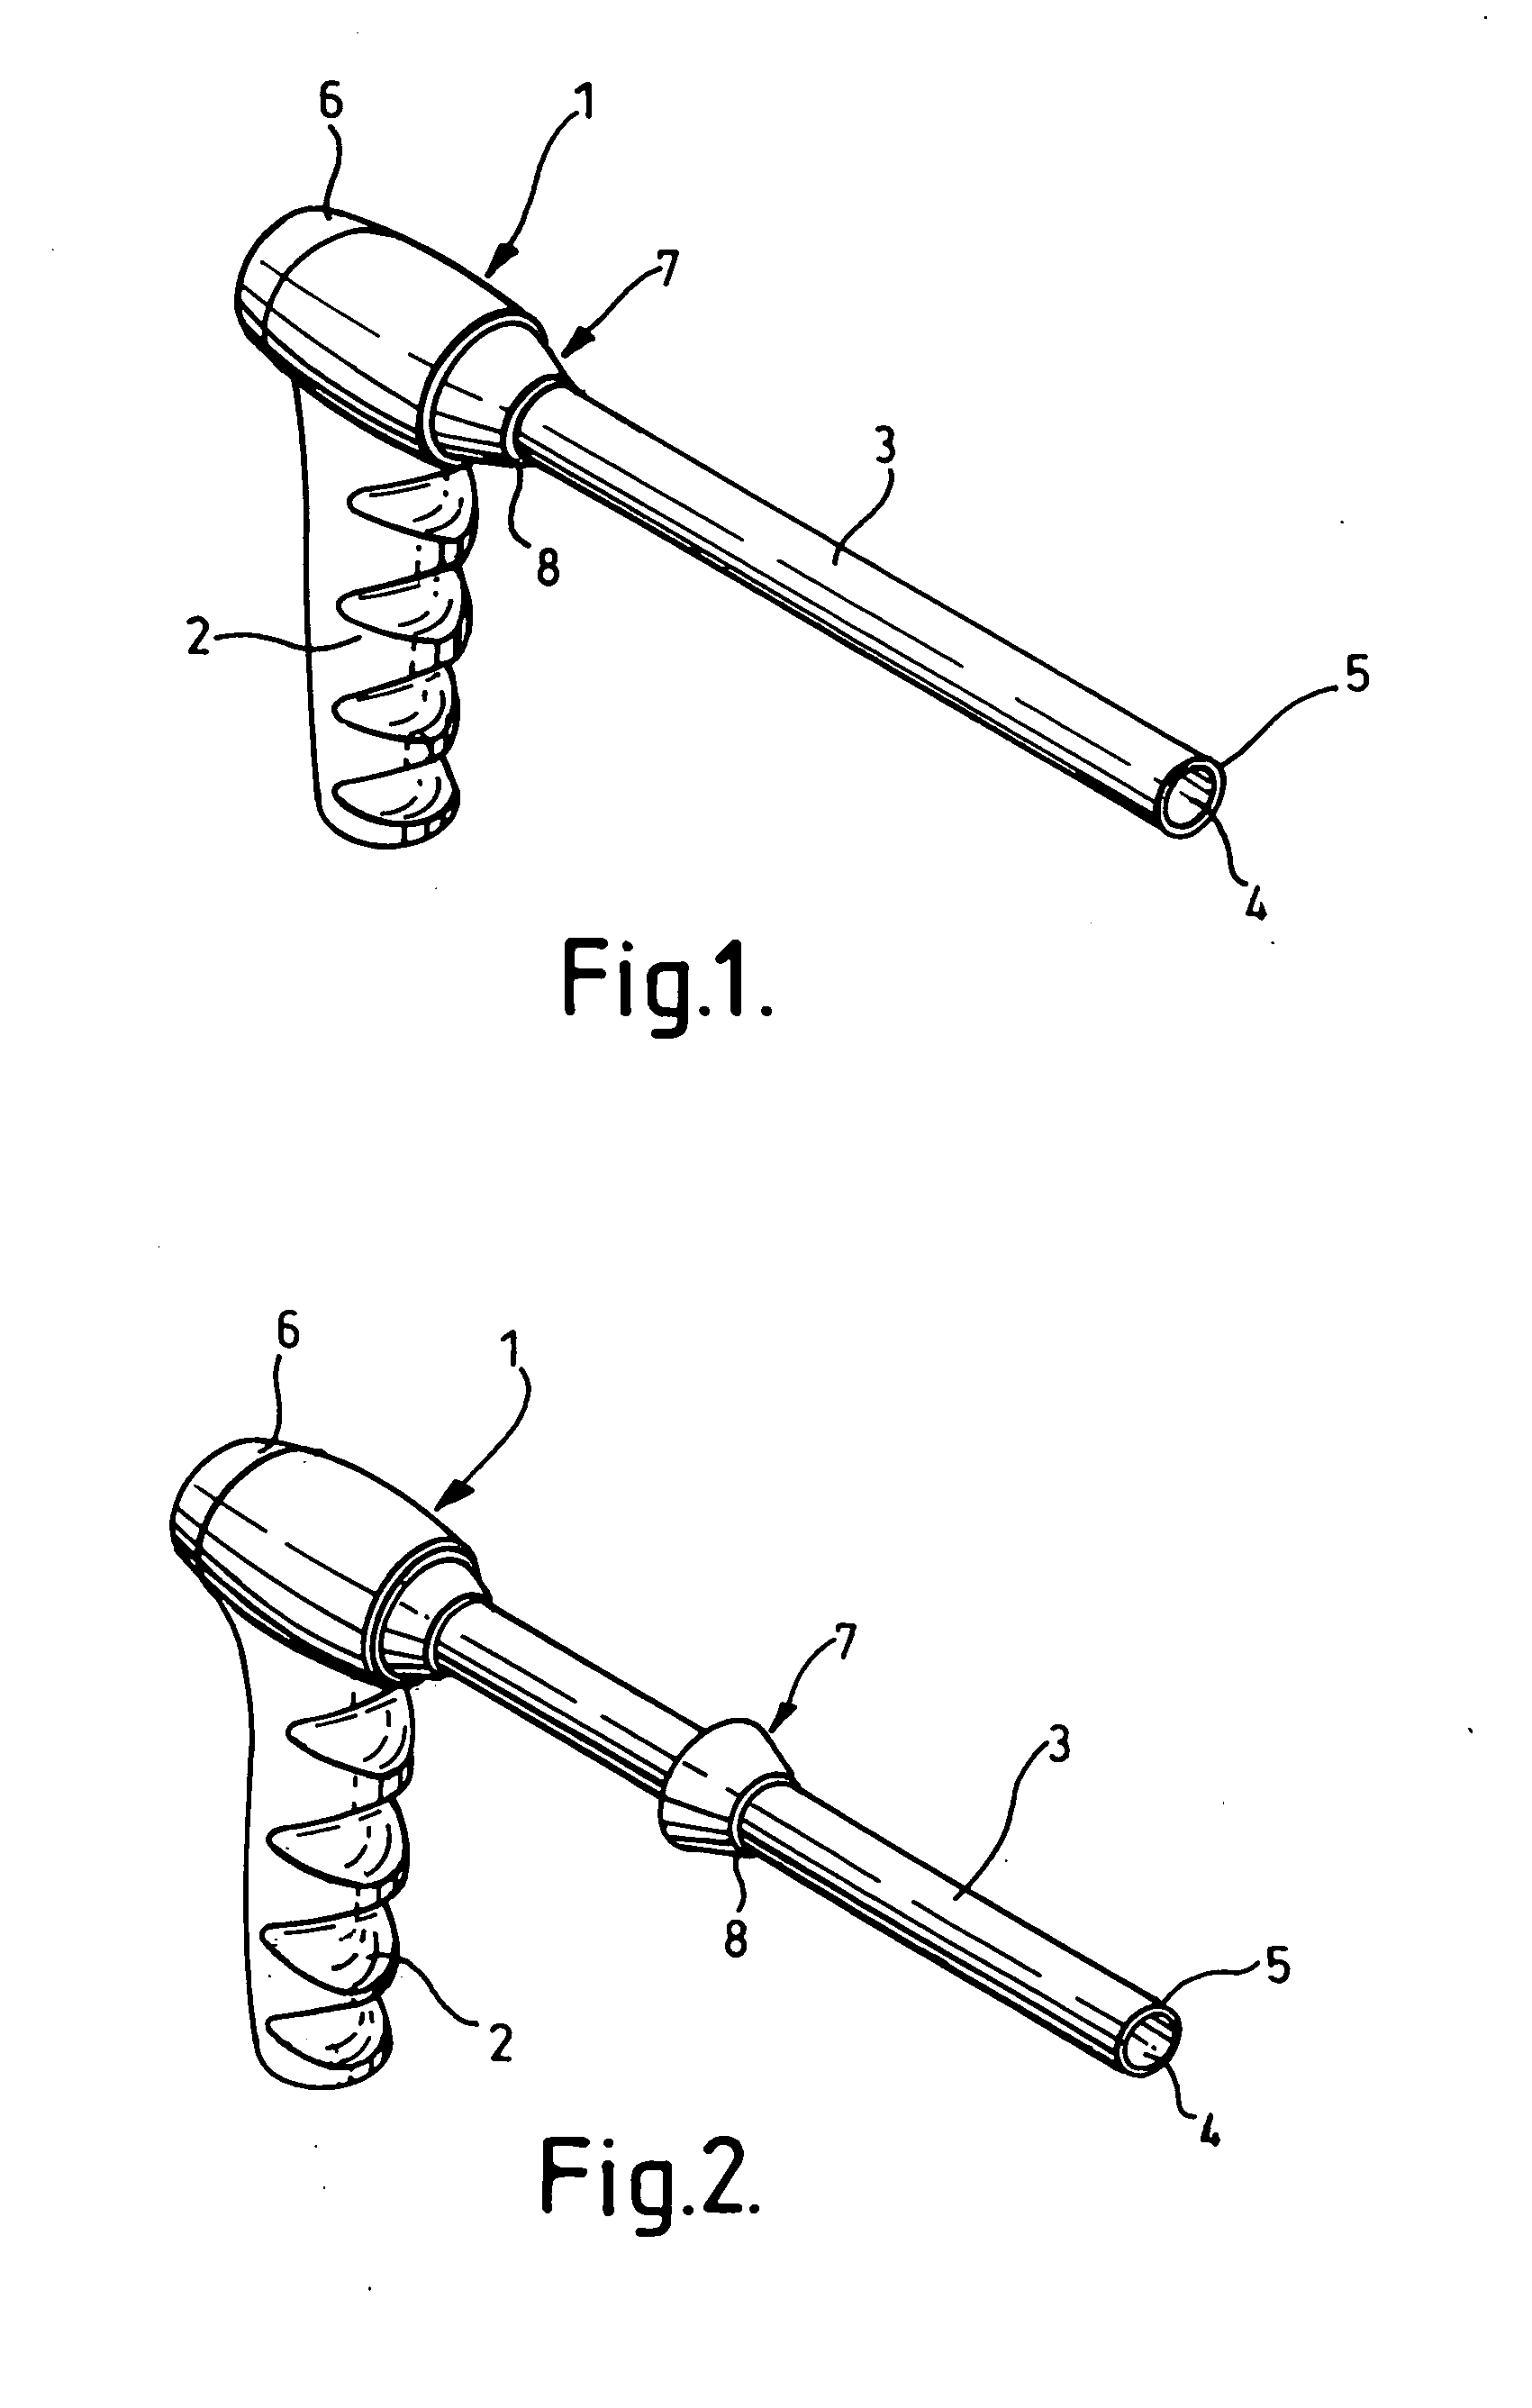 Tissue morcellating device